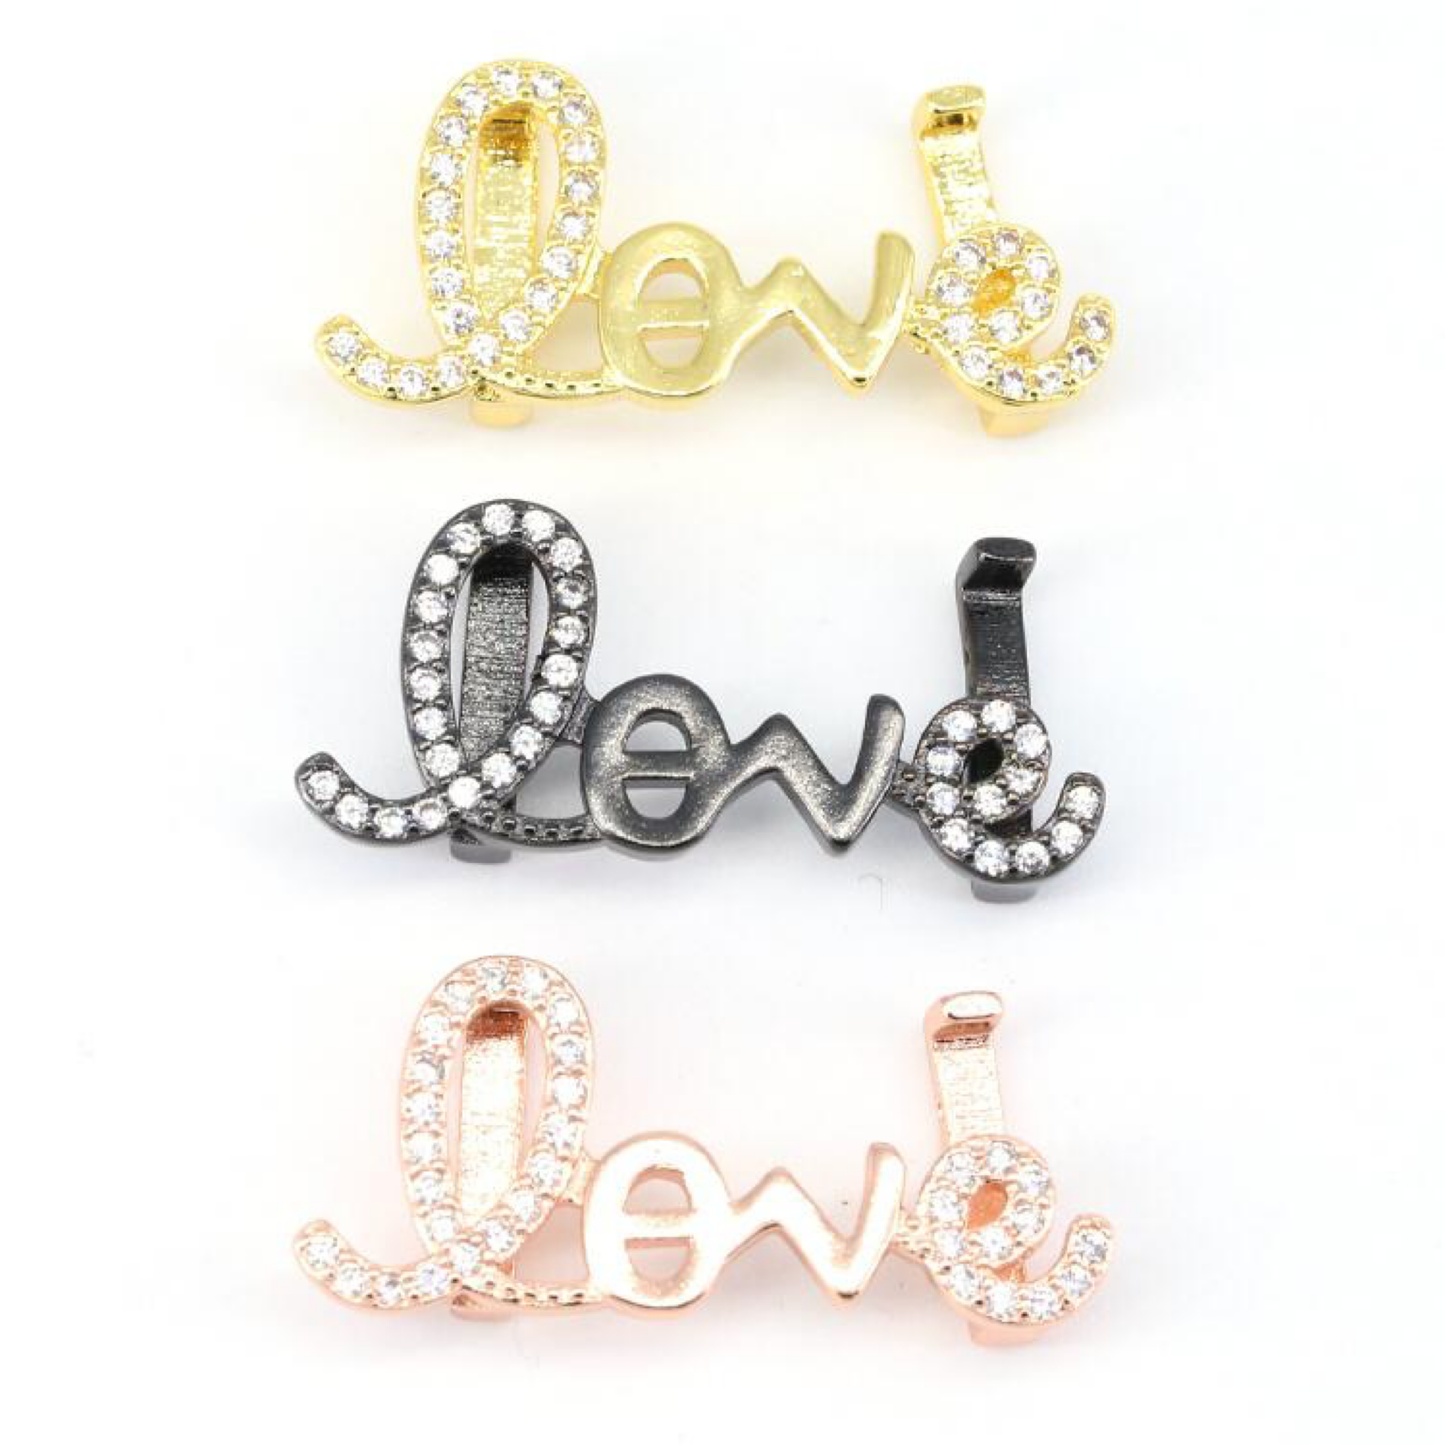 LOVE CHARMS LIFE COLLECTION - Unique Brazilian Jewelry (4507109883979)